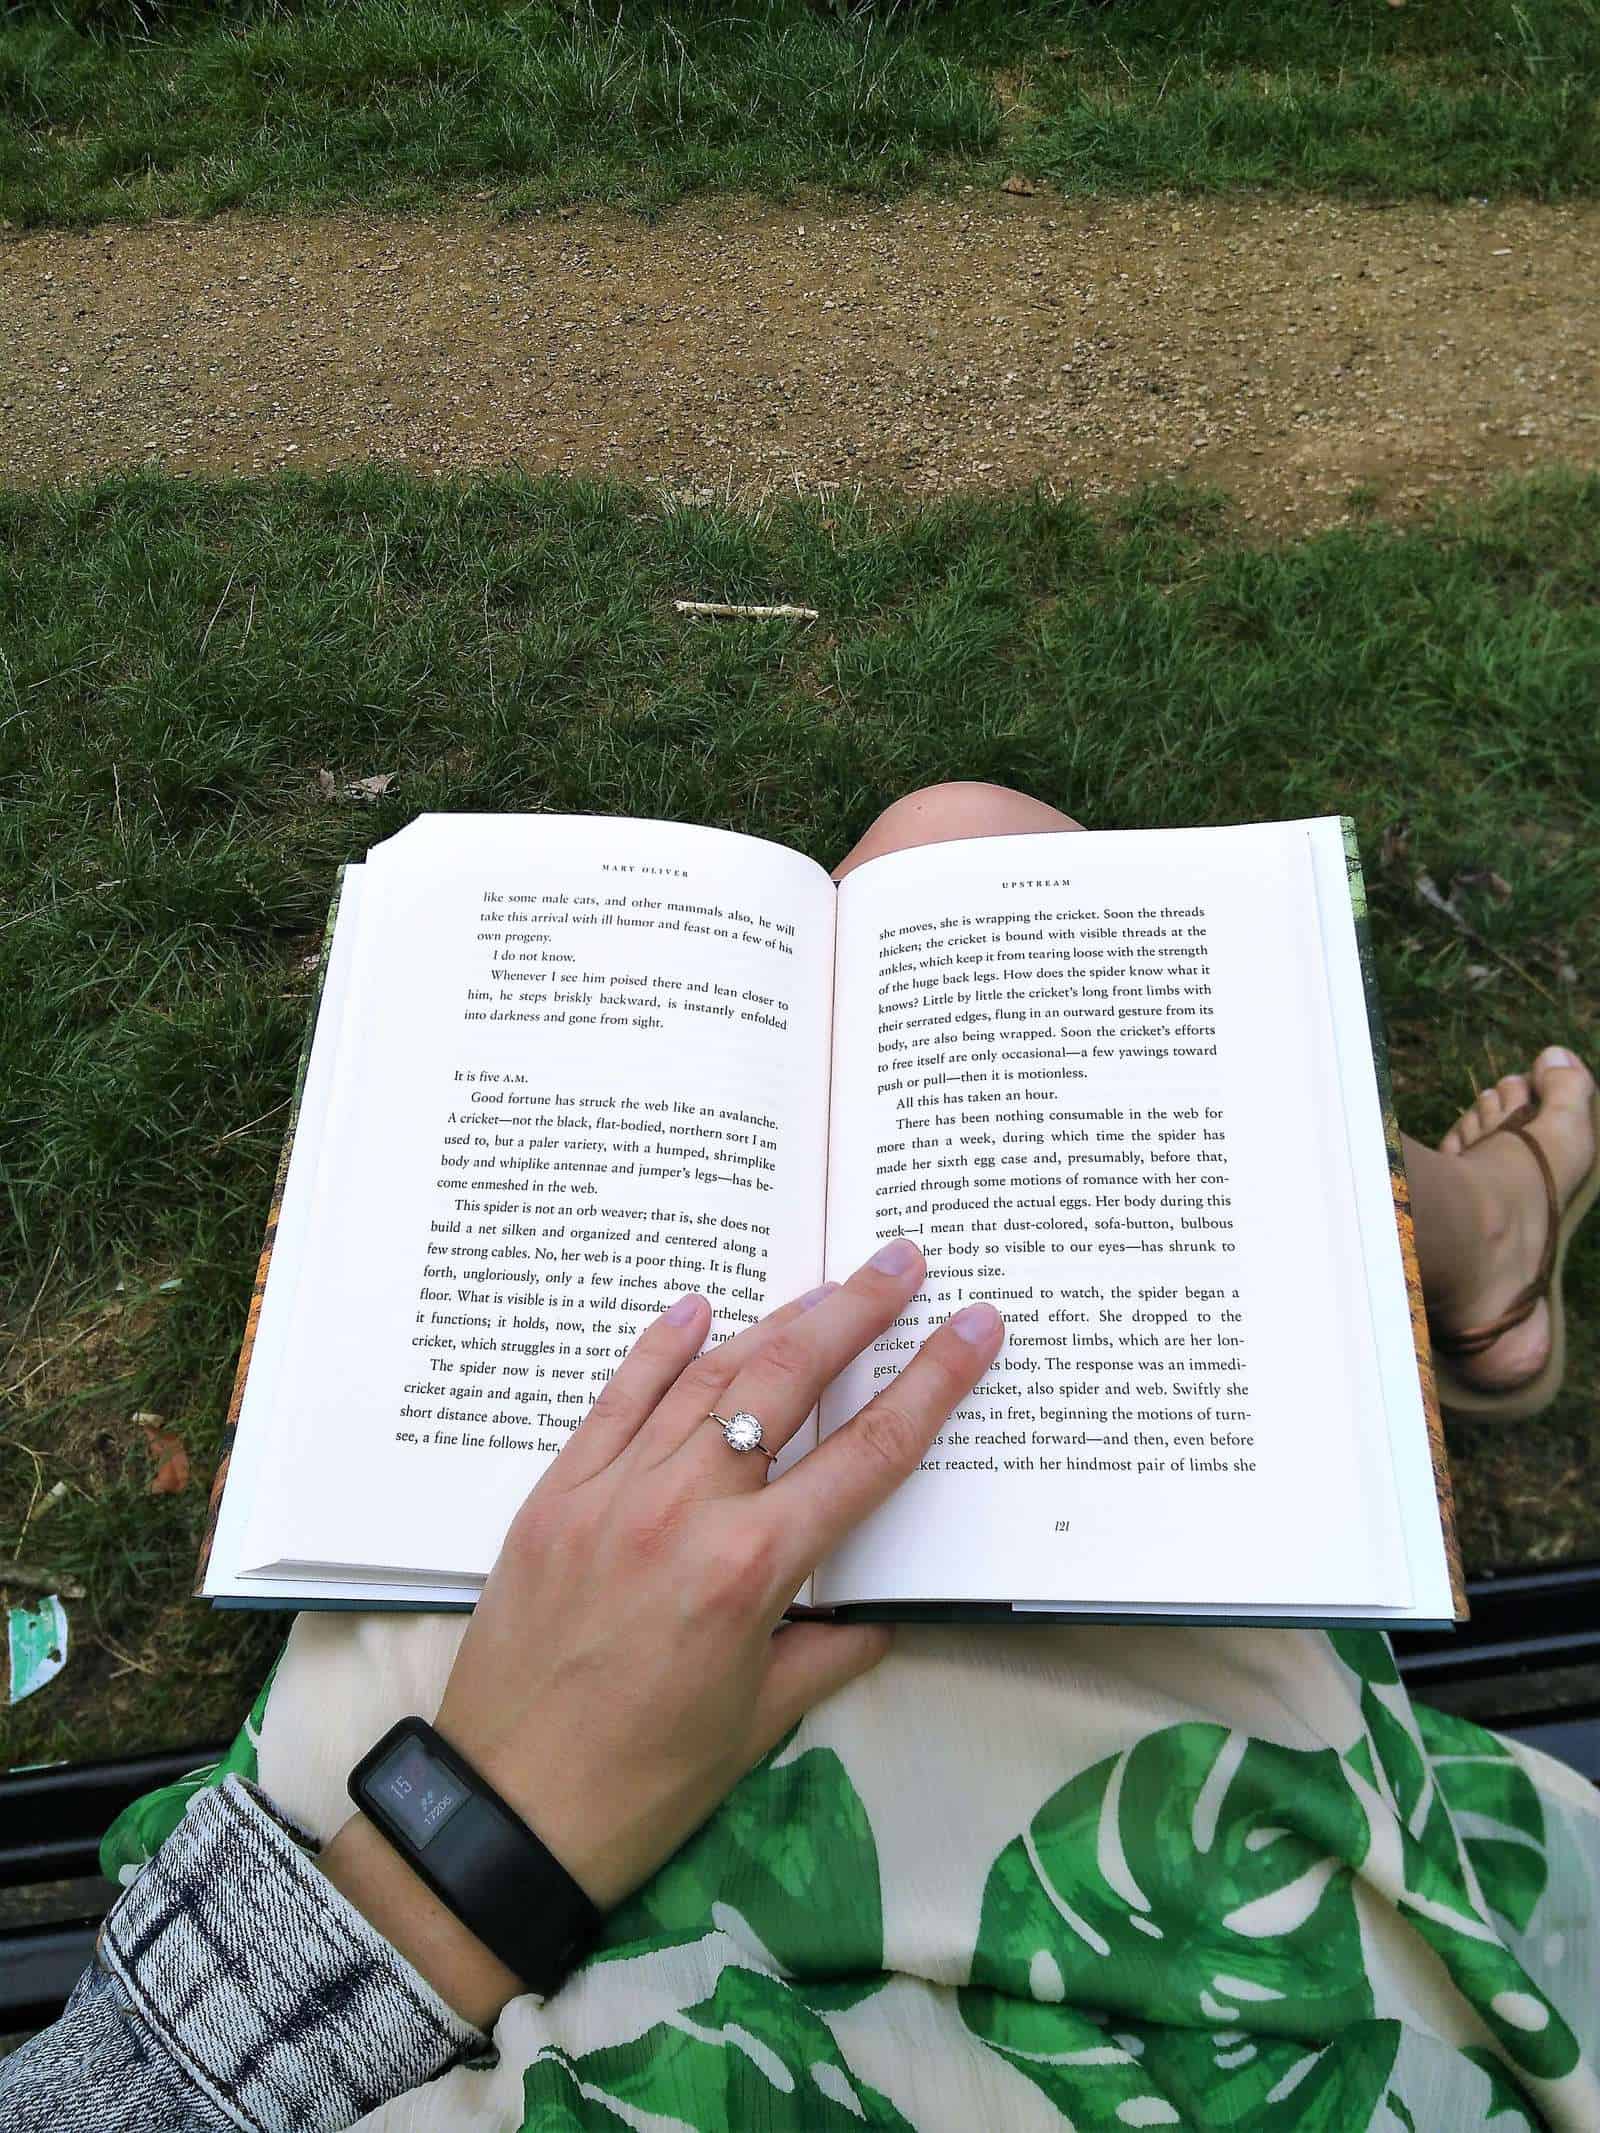 Book hopping: reading a chapter on a bench